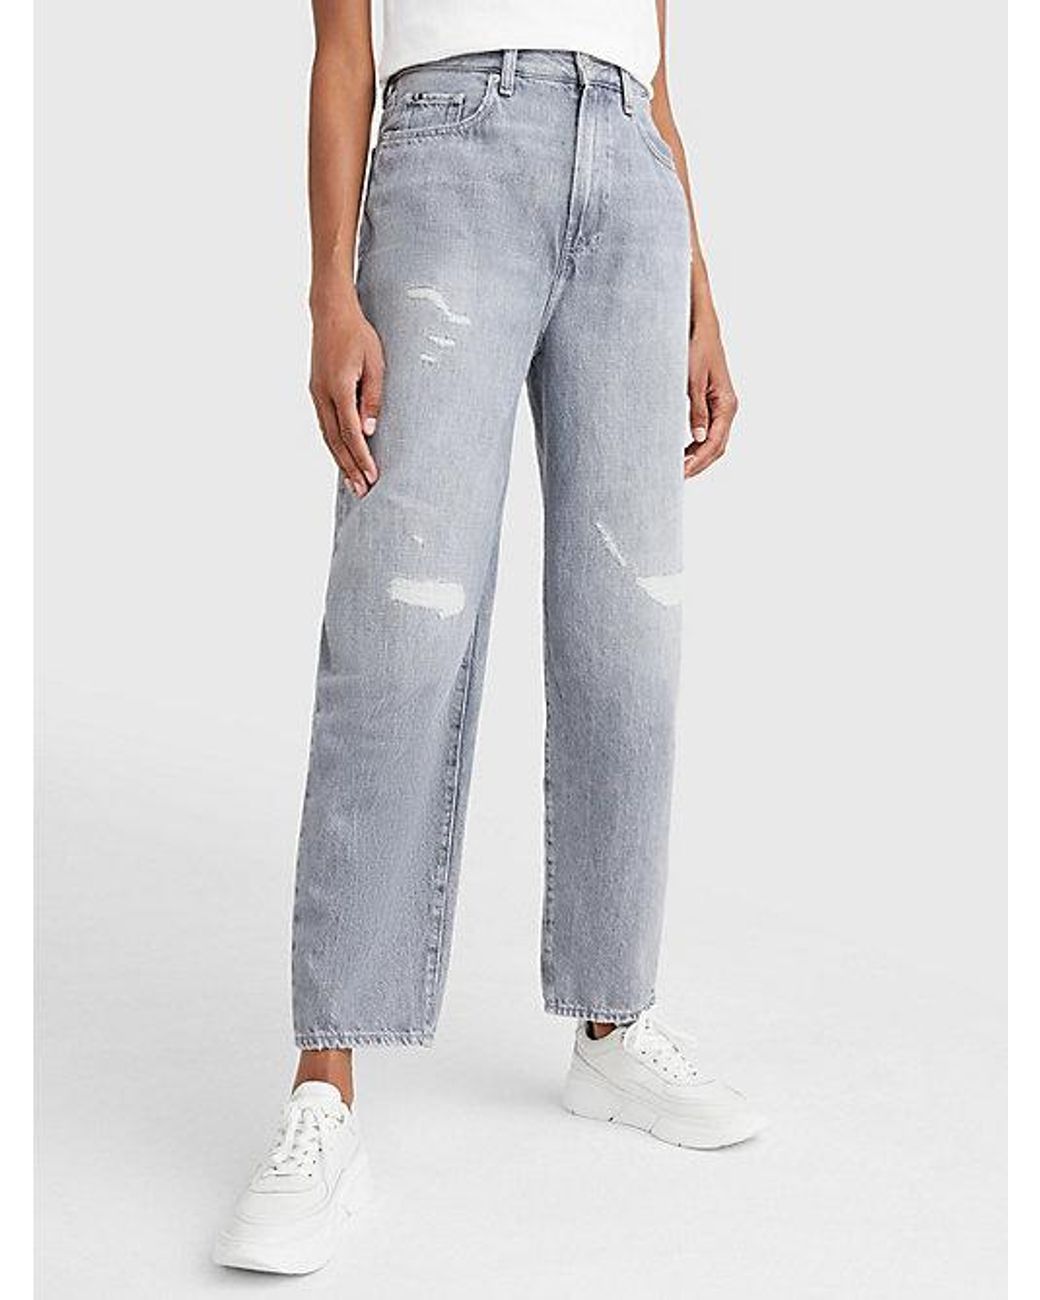 Tommy Hilfiger High Rise Relaxed Jeans Met Distressing in het Blauw | Lyst  NL